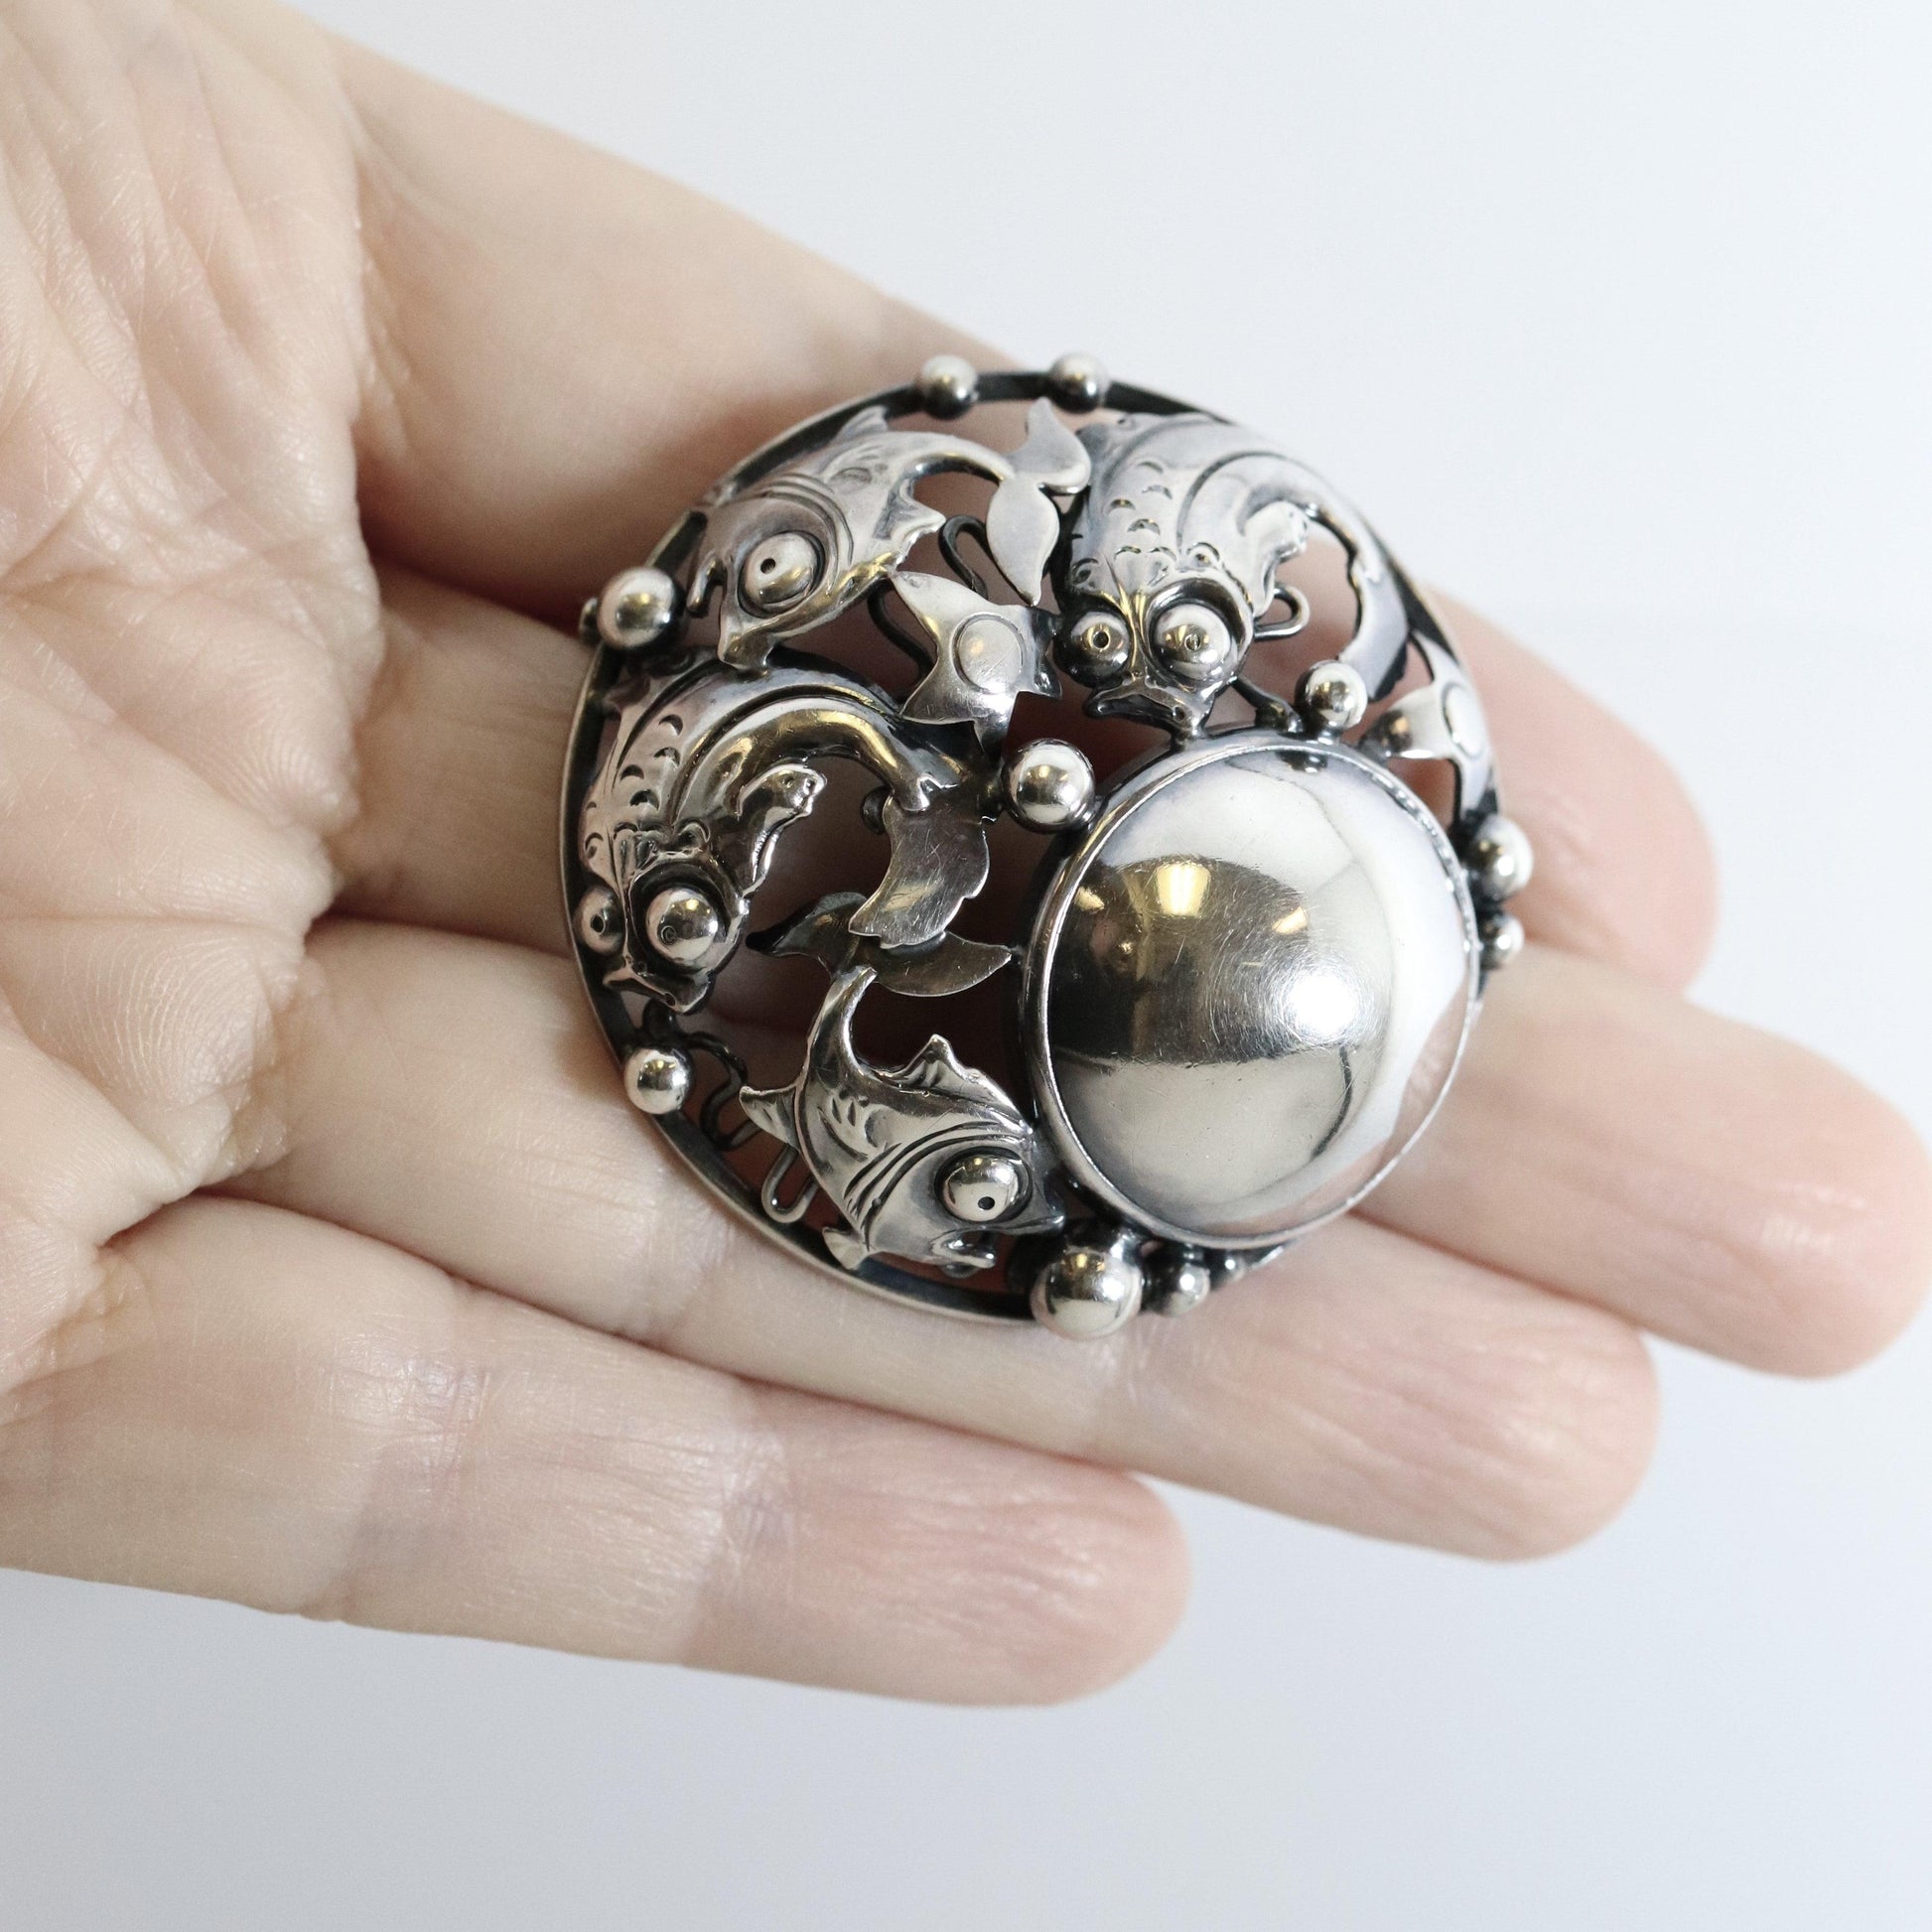 Vintage NE From Sterling Silver Jewelry | Round Silver Cabochon Fish Brooch - Carmel Fine Silver Jewelry